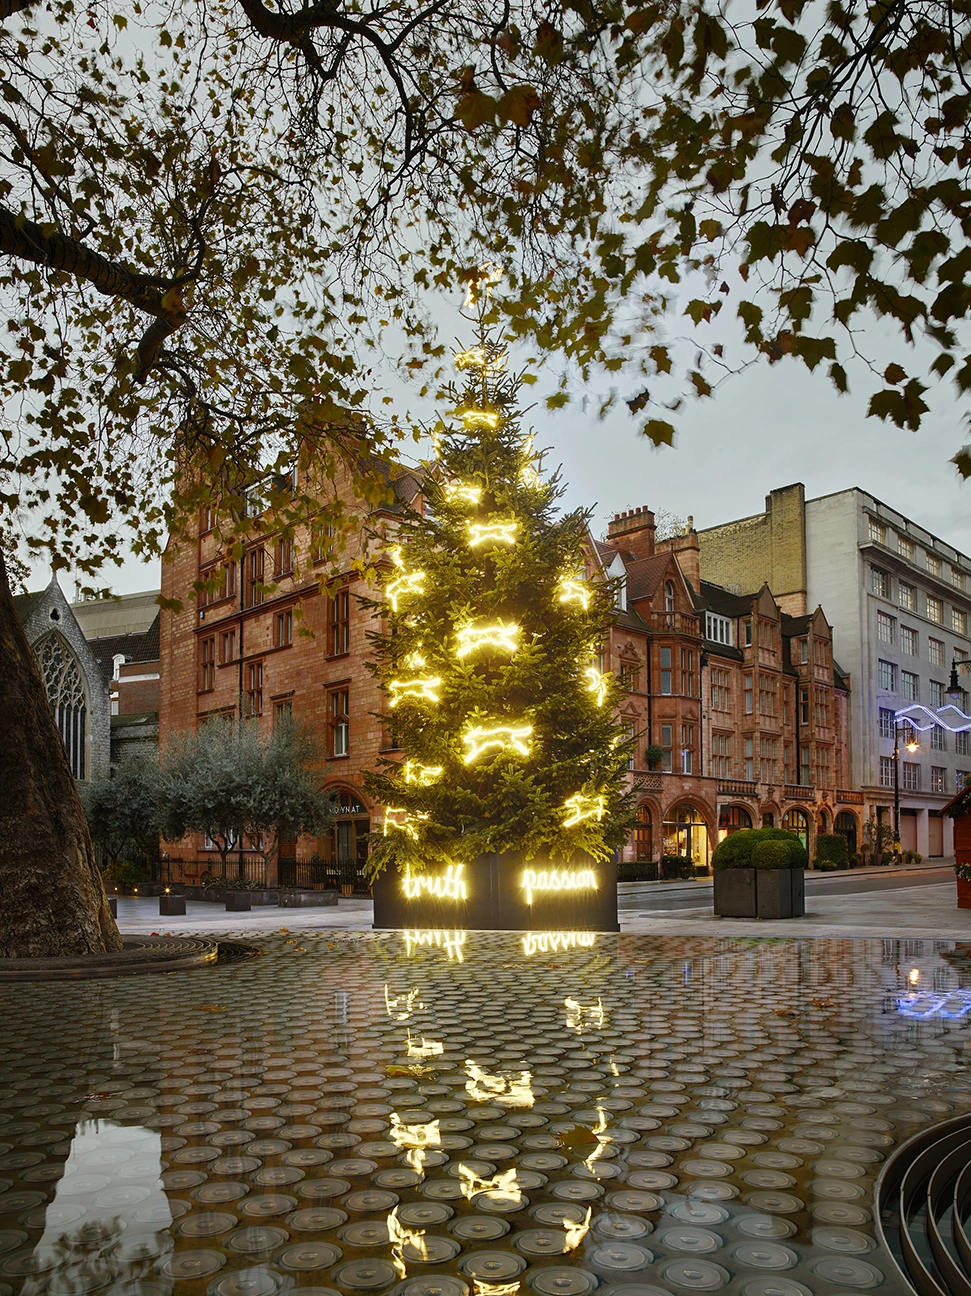 The 10 Most Spectacular Christmas Trees in London To Visit